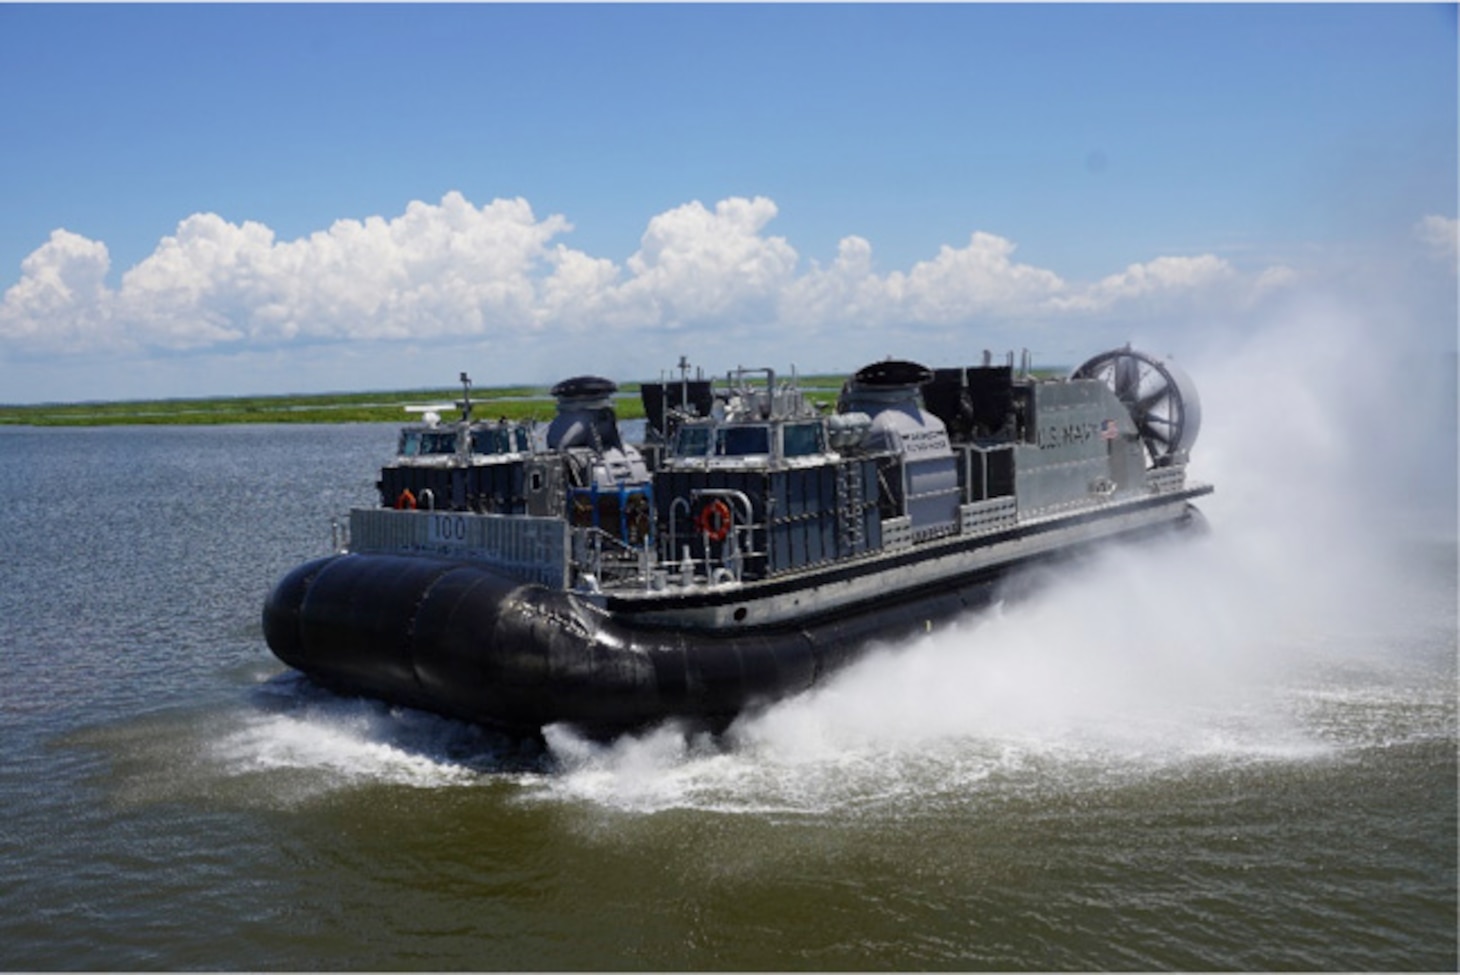 Ship to Shore Connector (SSC), Landing Craft, Air Cushion (LCAC) 100, conducts exercises in the local waterways of Louisiana.